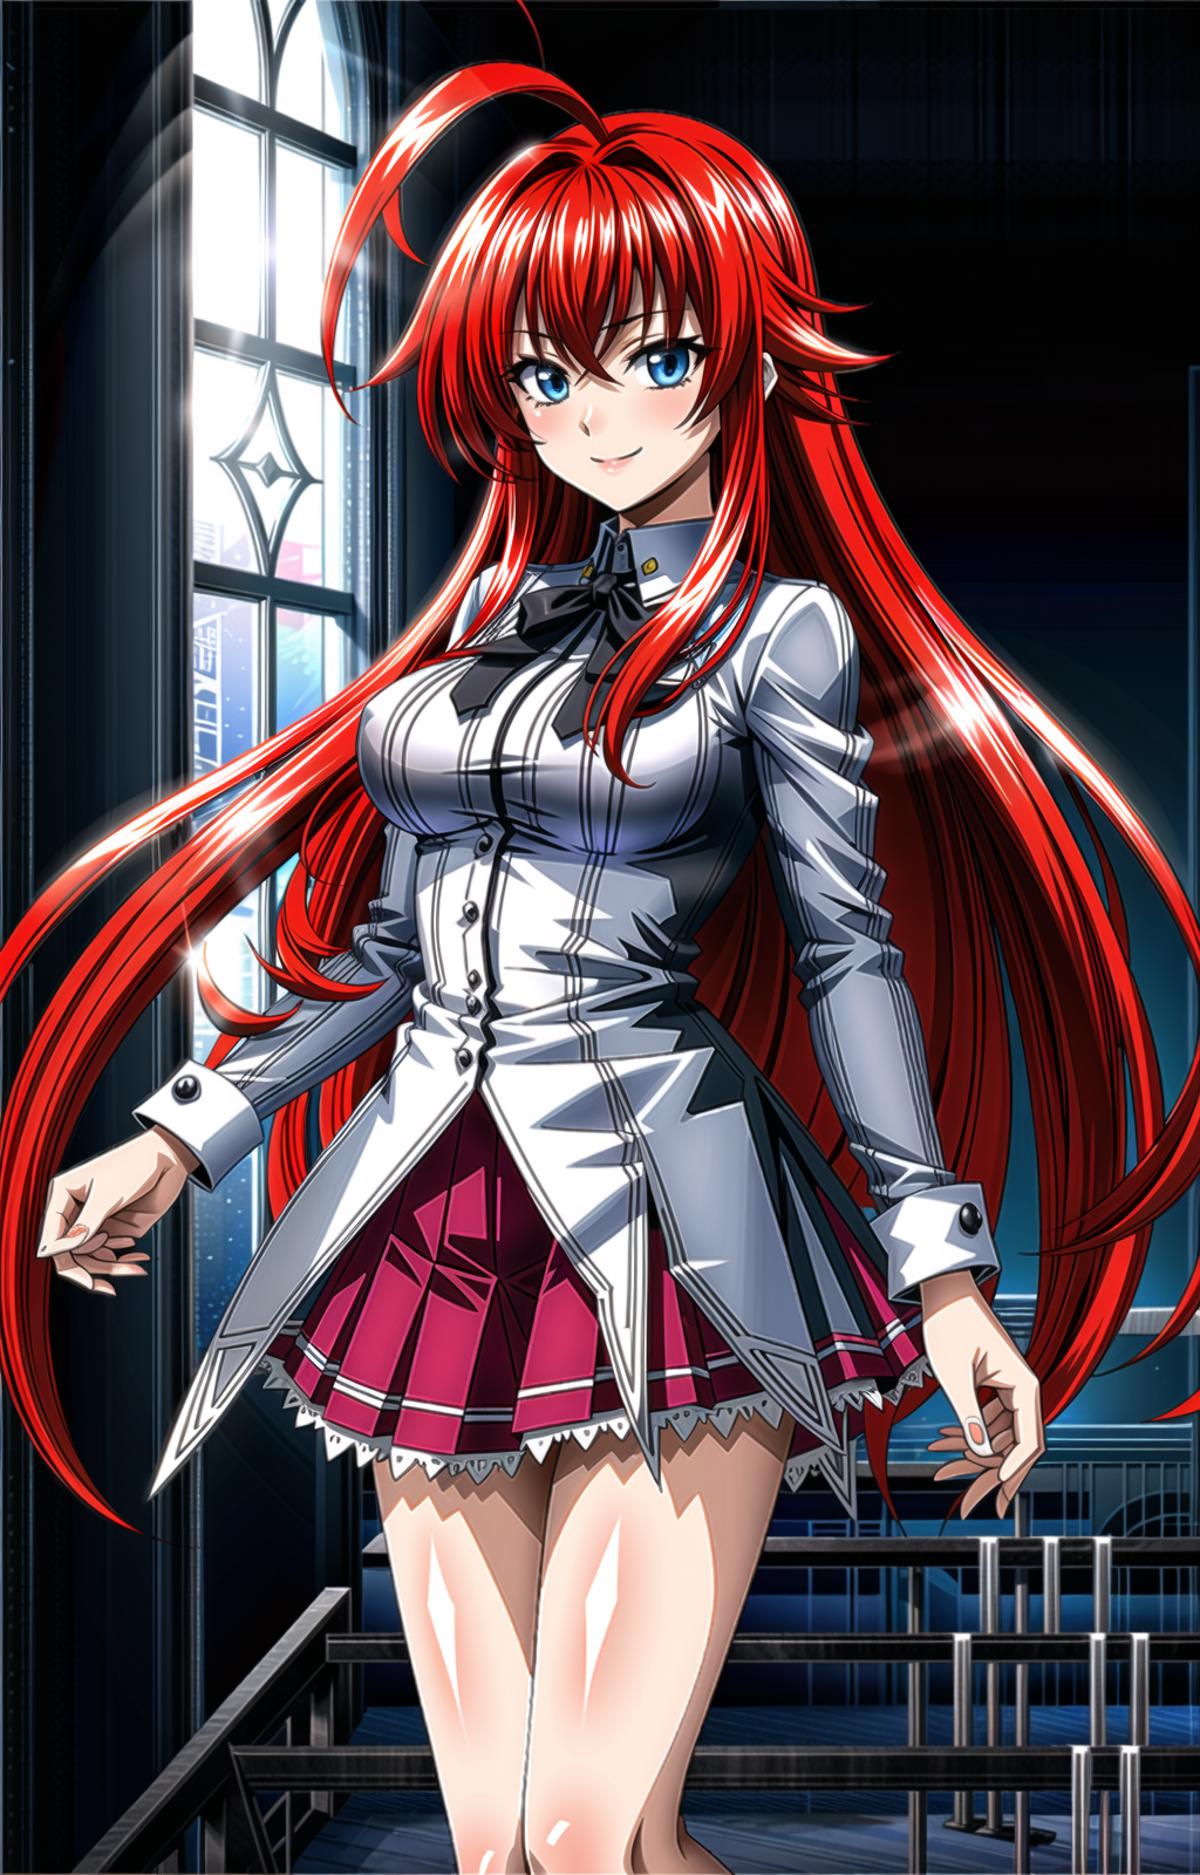 Rias Gremory リアス・グレモリー / High School D×D image by MrCluckYou